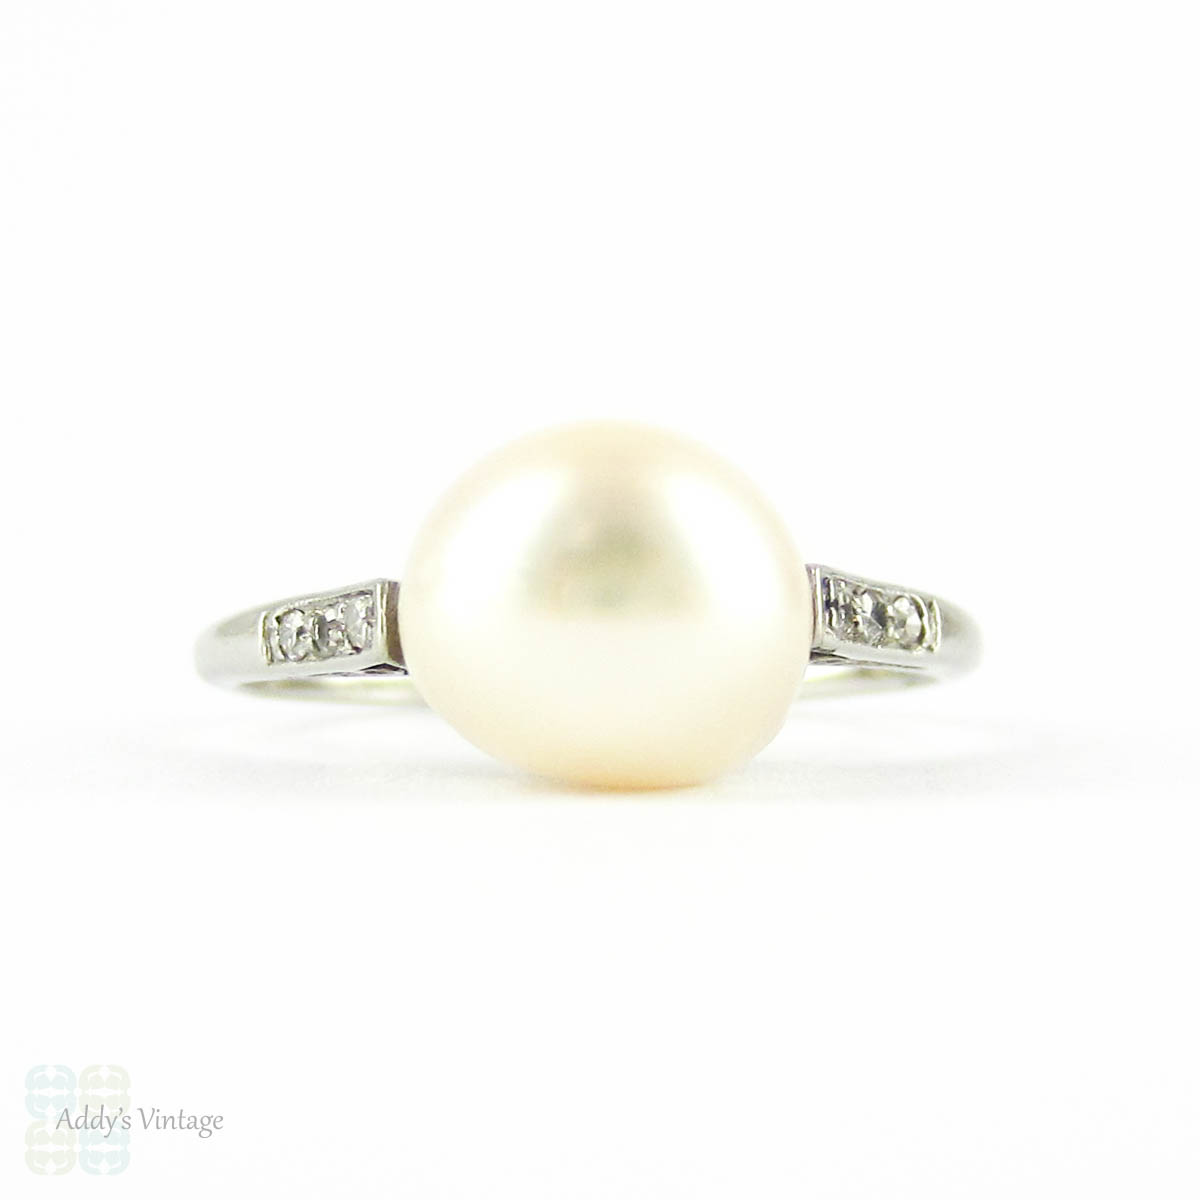 Stunning Platinum and Fresh Water Pearl Ring with Diamond Accents -  Timekeepersclayton